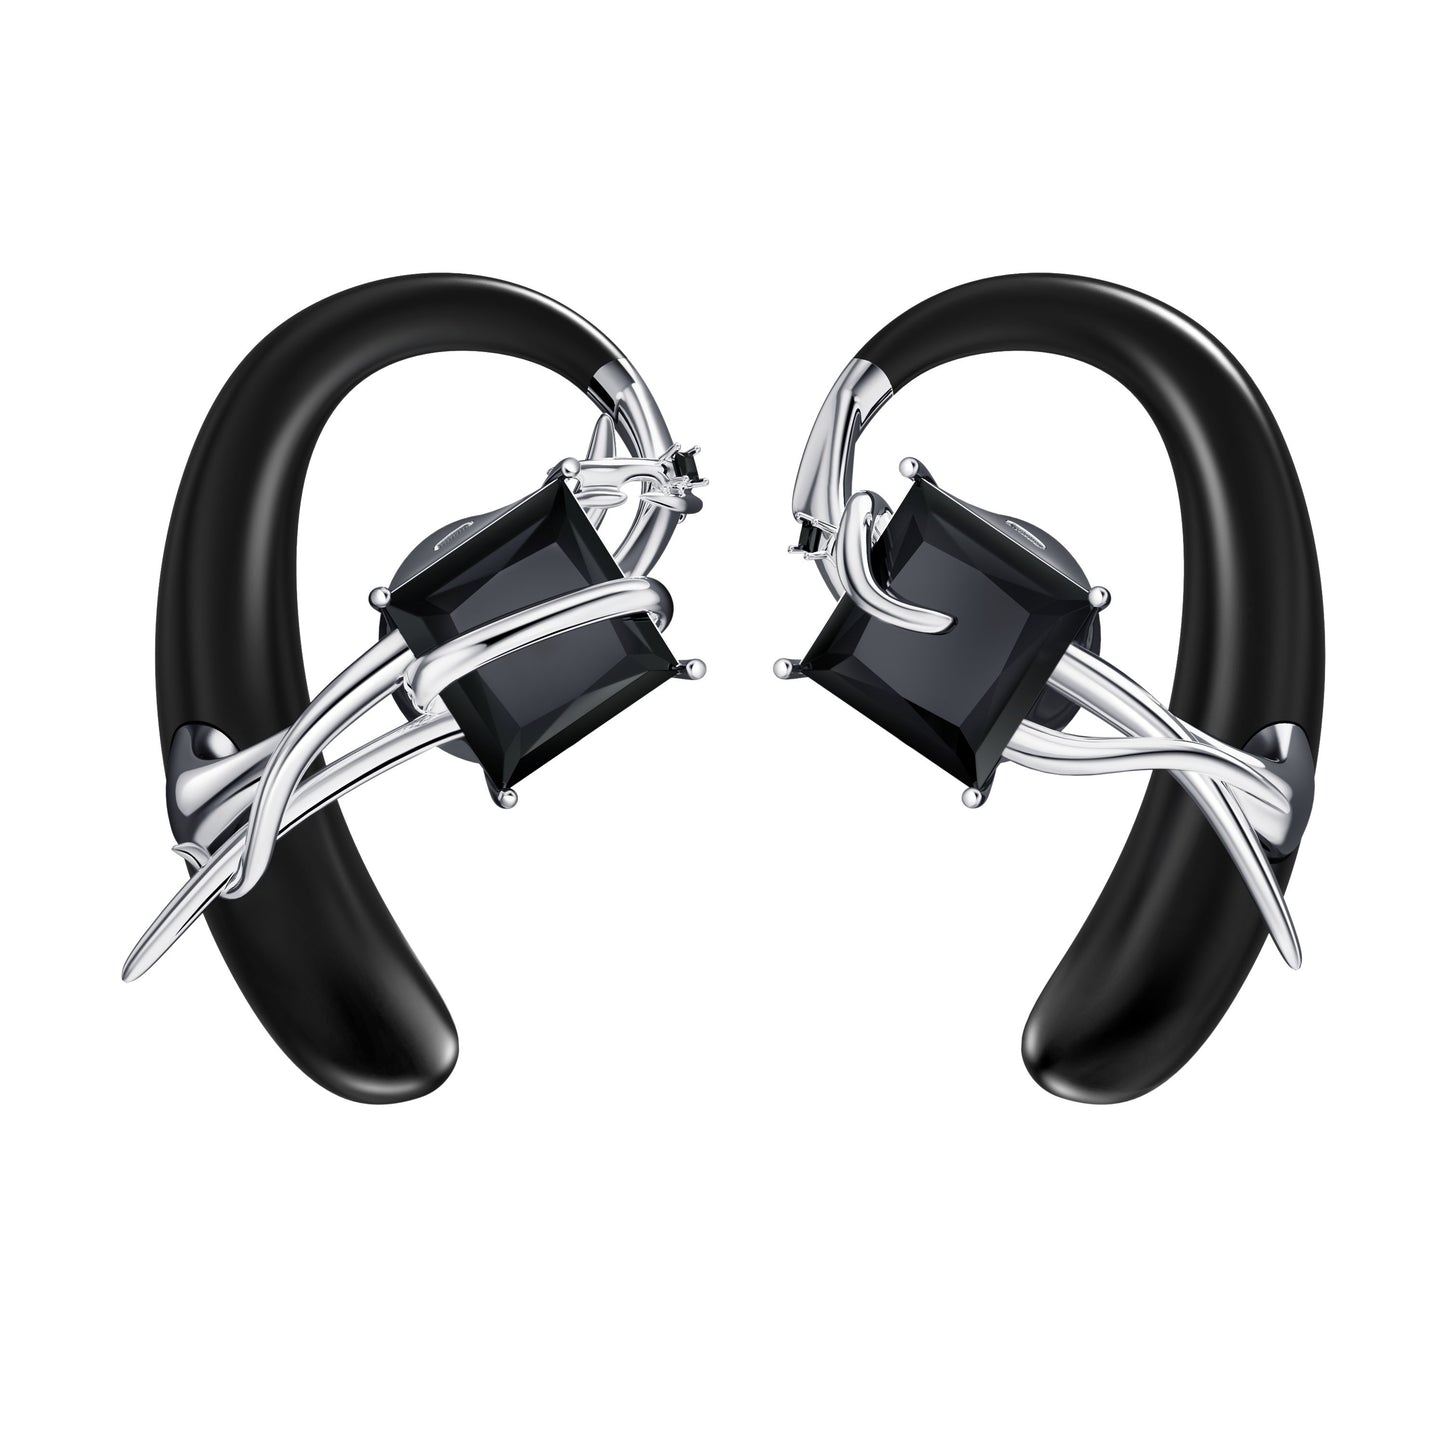 MONOLITH -  OWS Open-Style Accessory Headphones